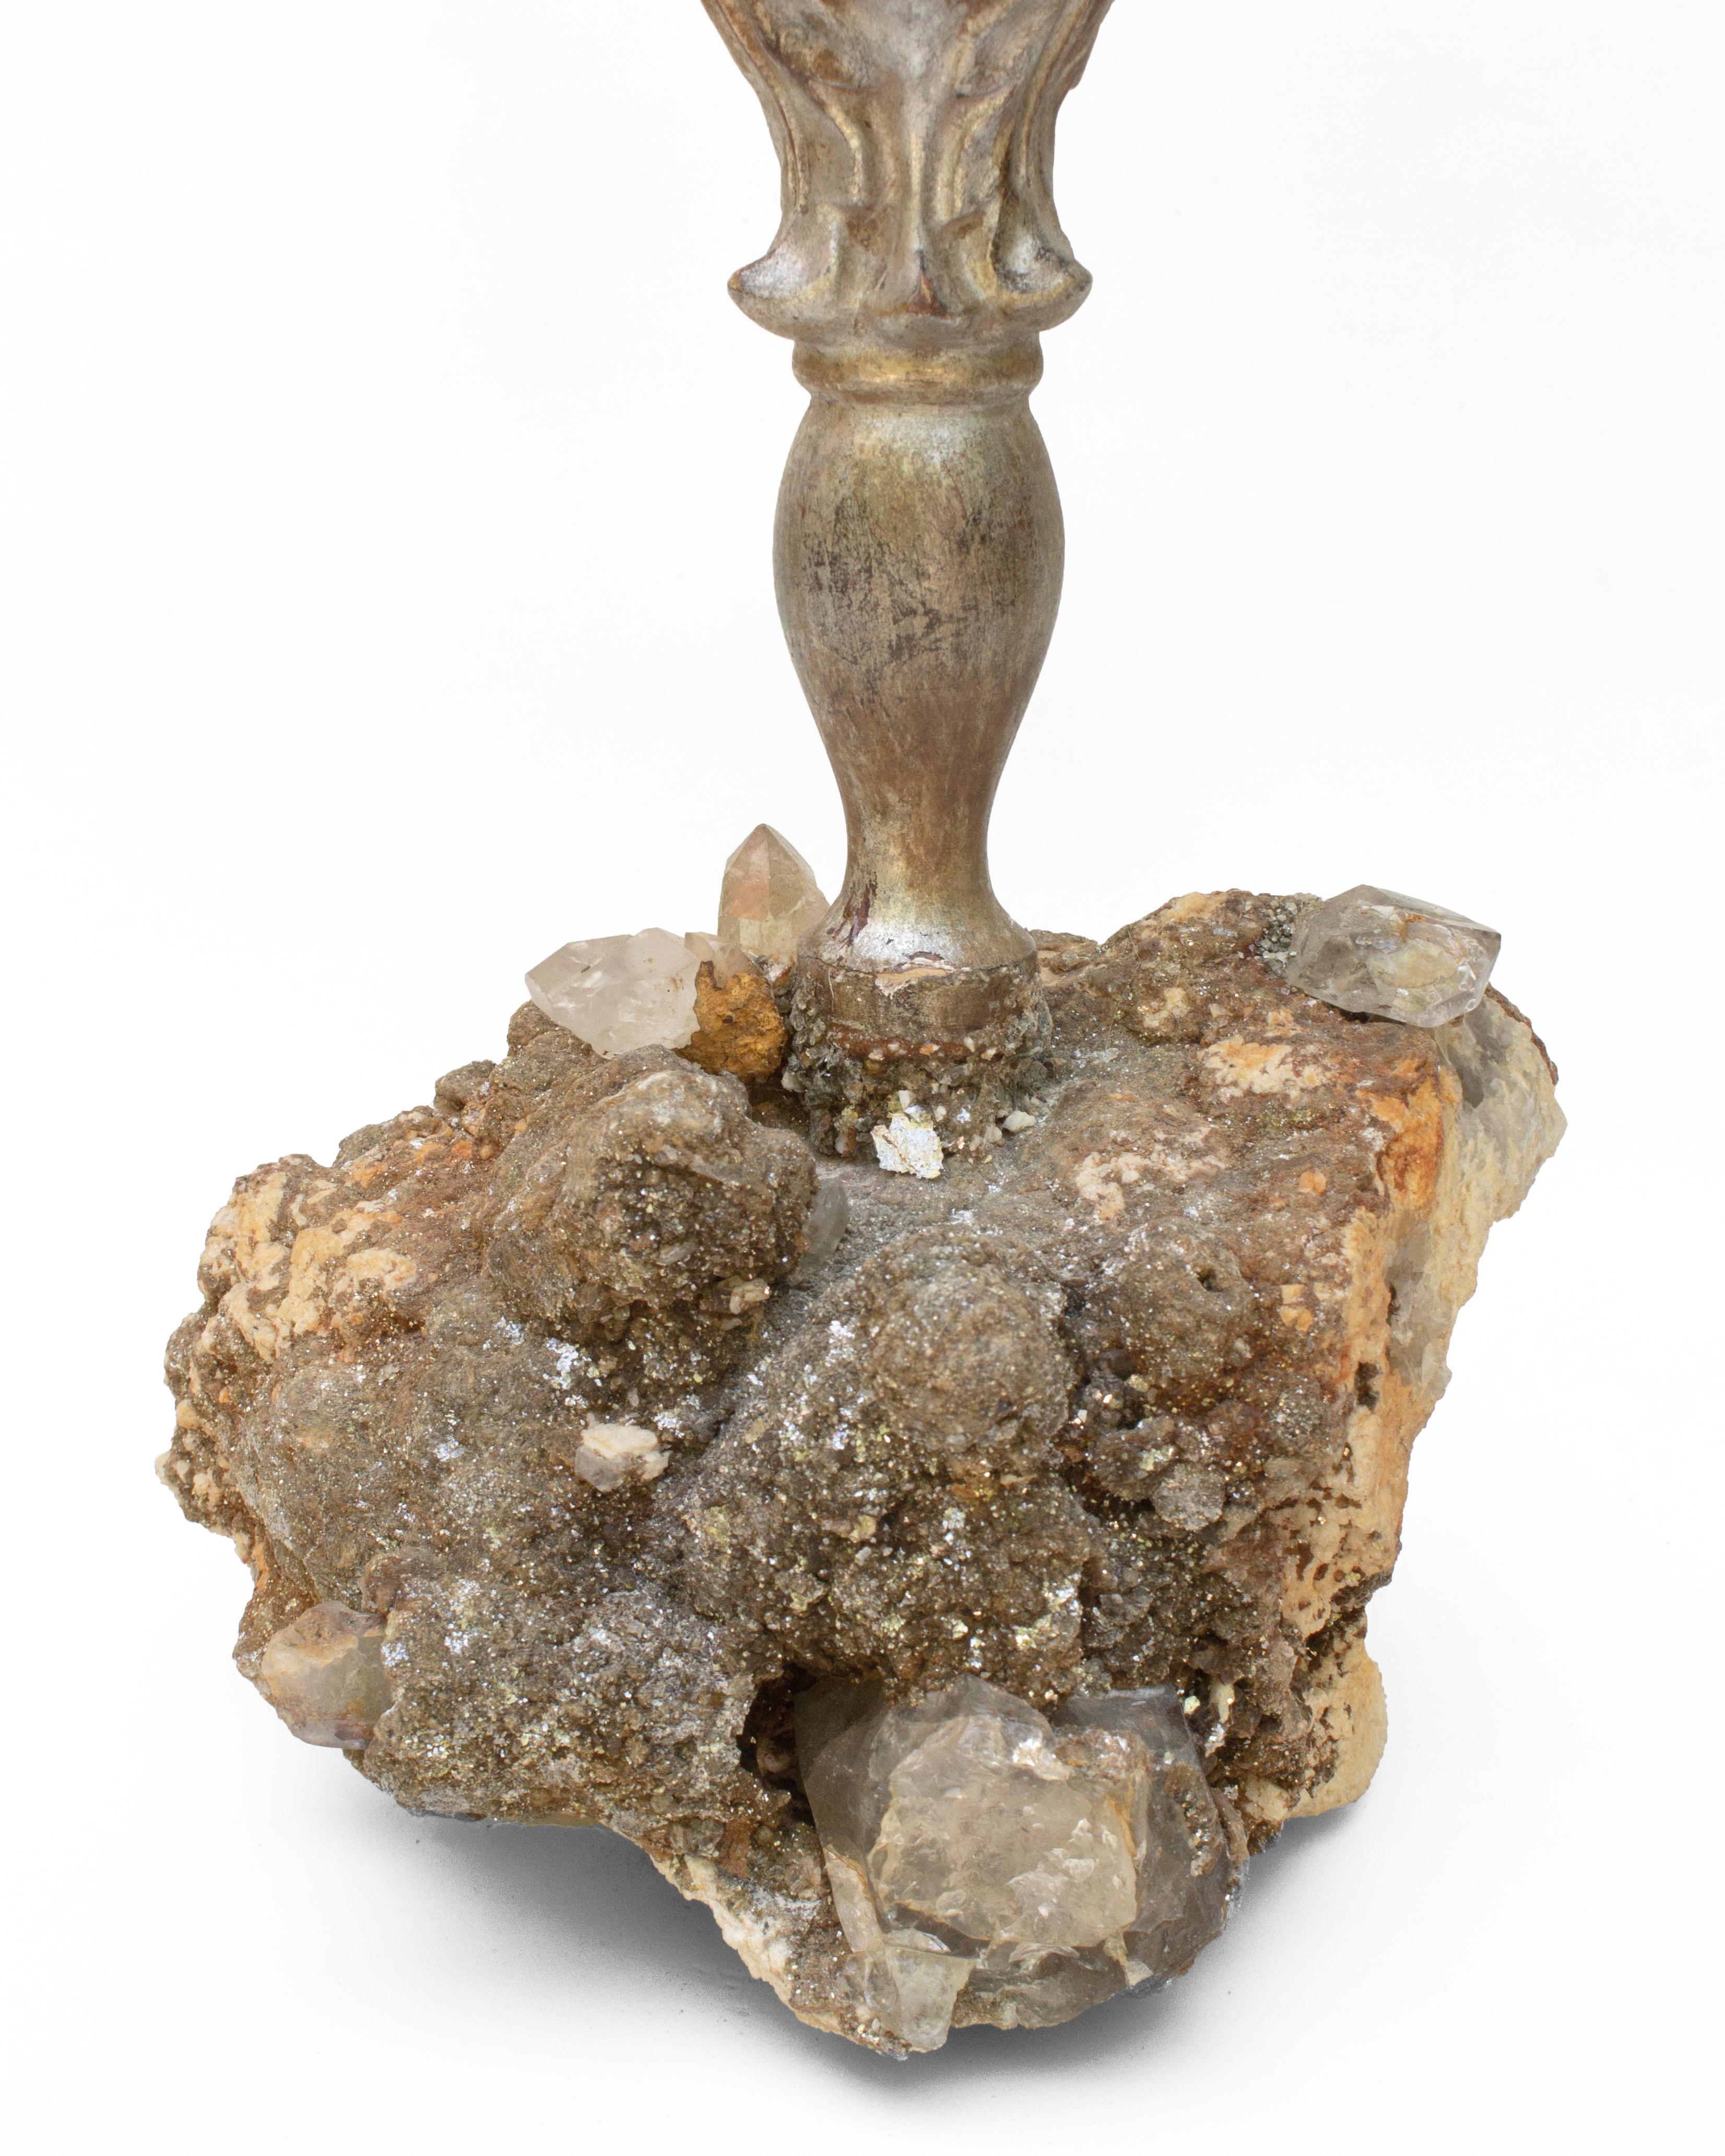 18th century Italian silver candlestick decorated with a large Herkimer diamond with inclusions surrounded by mica foliage ruffle on mica with a calcite matrix base with Herkimer diamonds. Herkimer diamonds are double-terminated quartz crystals